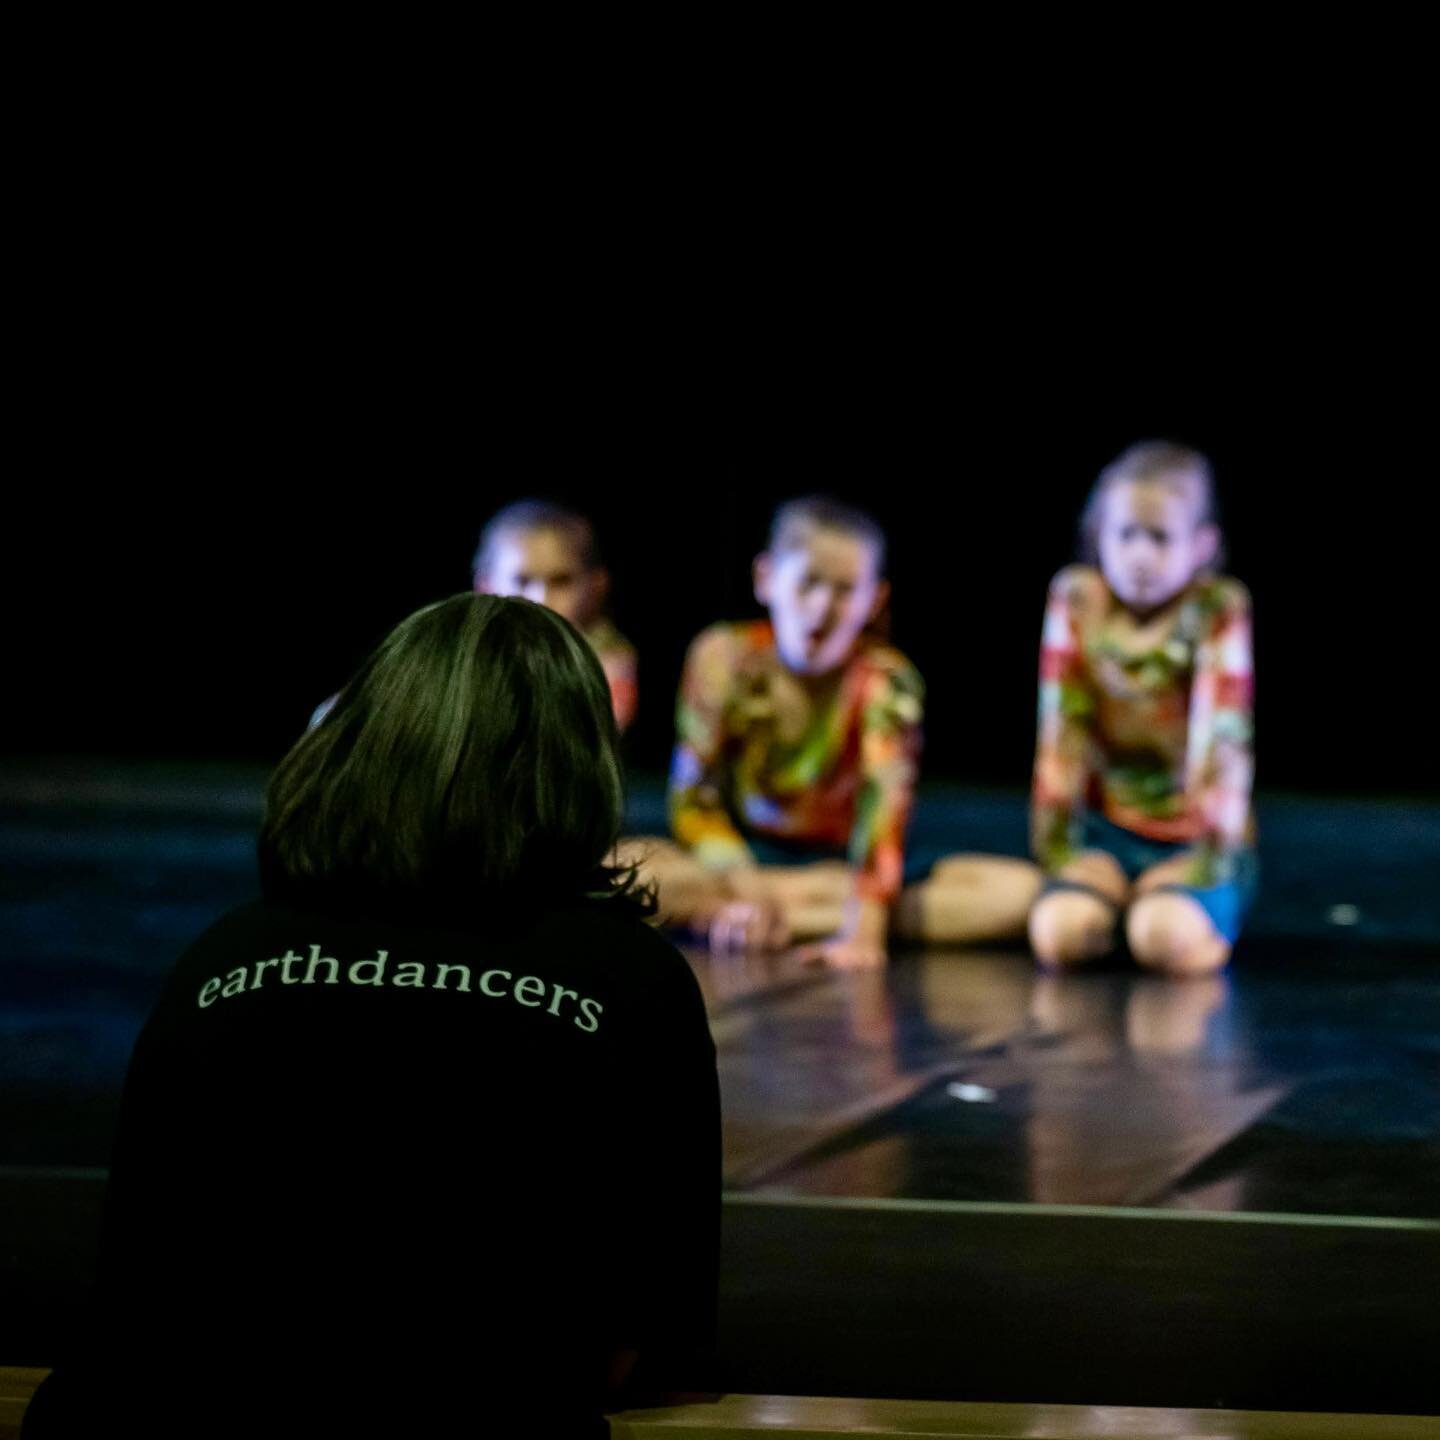 A few memories from earthdancers 2022!
.
We hope you&rsquo;ll join the earthdancers this year for their 30th annual benefit performance
When: May 5 and 6
Where: Place des Arts (27 Larch St)
Who: earthdancers plus alumni and guest artists
.
All ticket